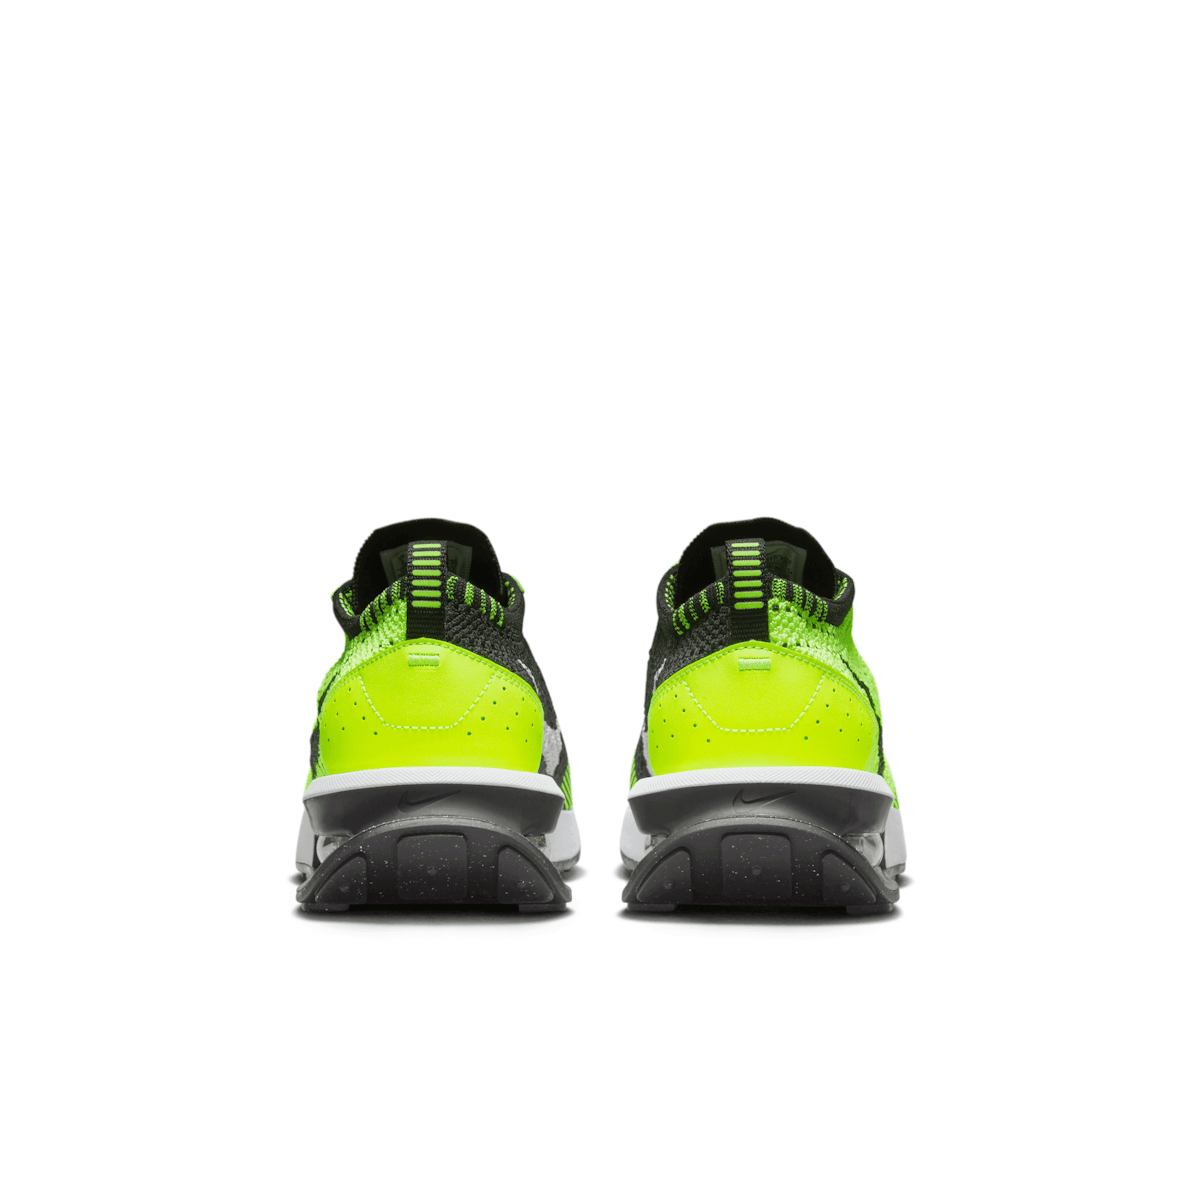 Nike Air Max Flyknit Racer Volt Black Angle 4